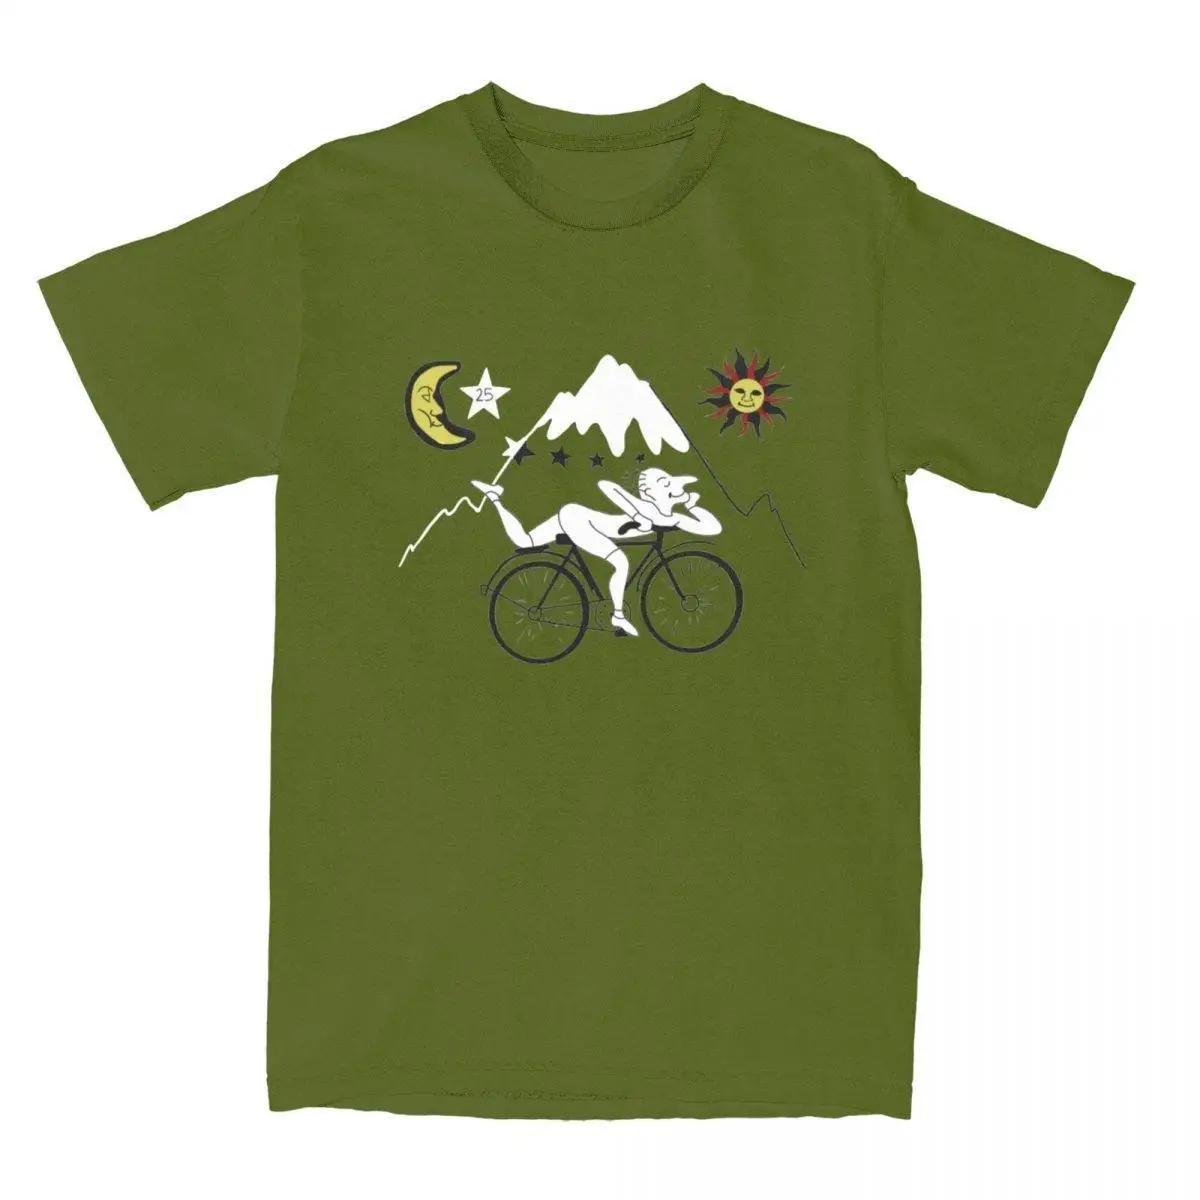 Funny Bicycle Day Mountain Bike T-Shirt for Men Round Collar Cotton T Shirts Albert Hoffman Short Sleeve Tees Summer Clothing